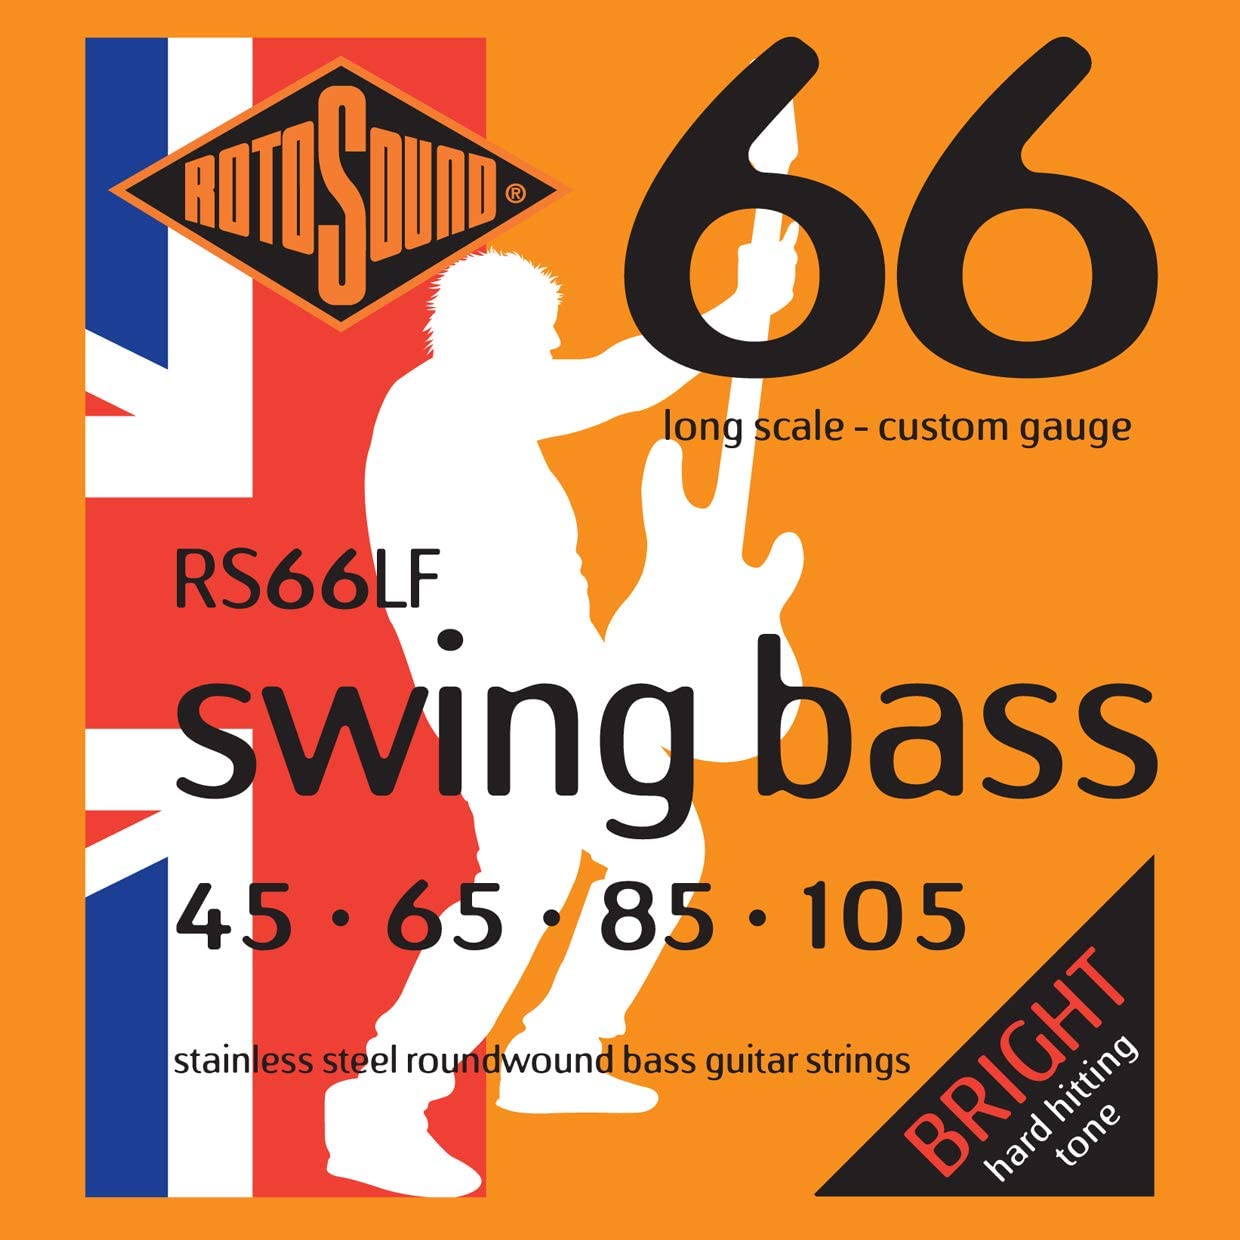 Rotosound RS66LF Swing Bass 66 Stainless Steel Bass Guitar Strings on a white background